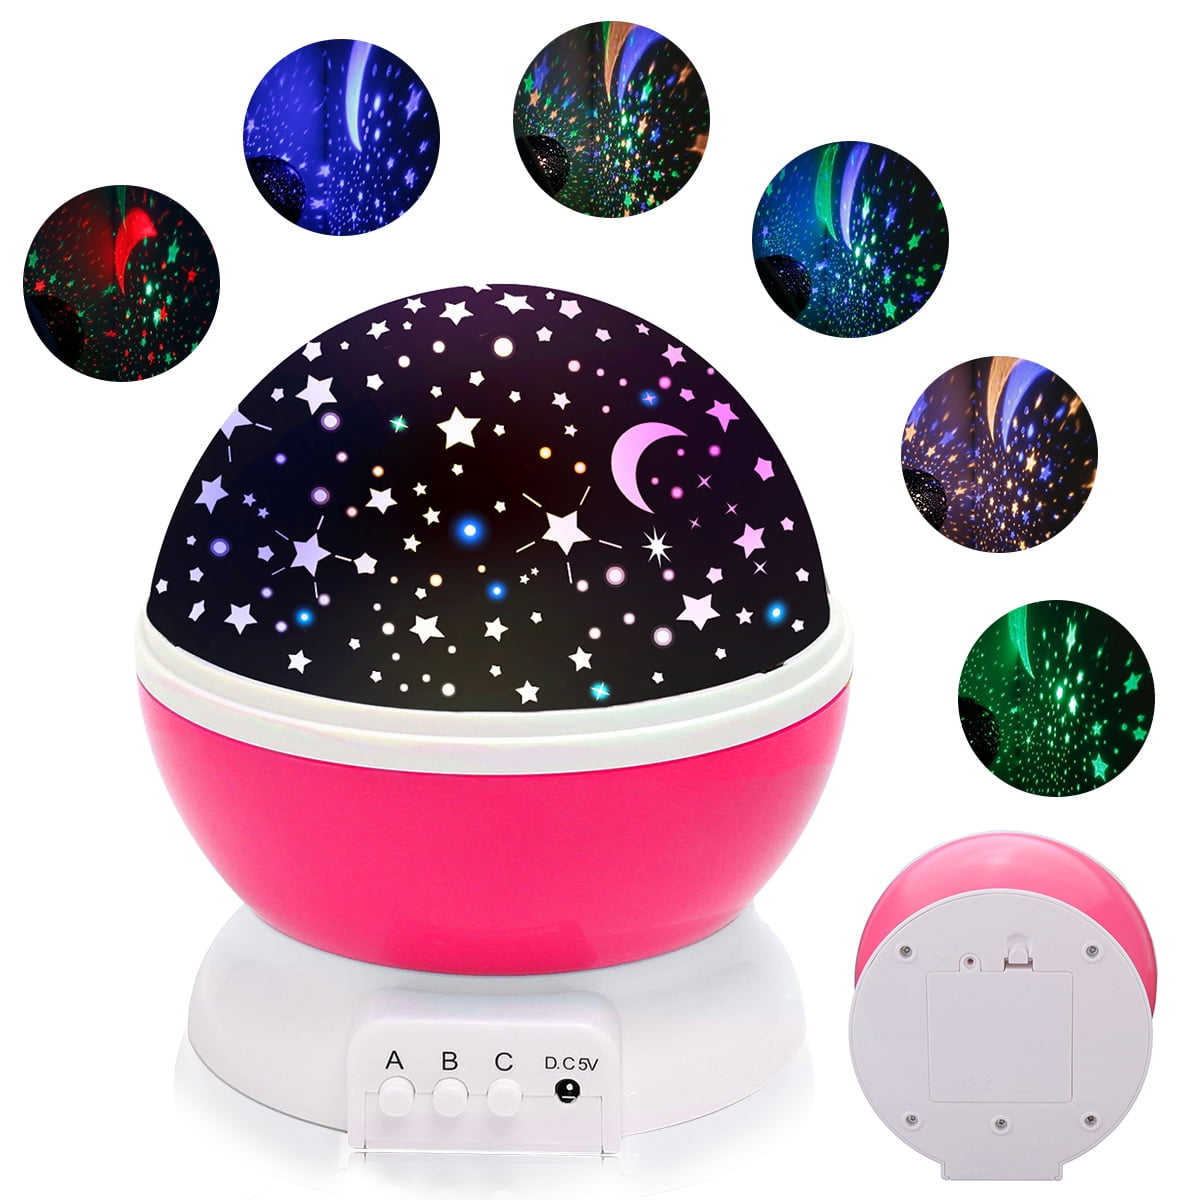 Details about   LED Starry Night Sky Star Projector Lamp Party Decor Xmas Gift Bedroom Decor 